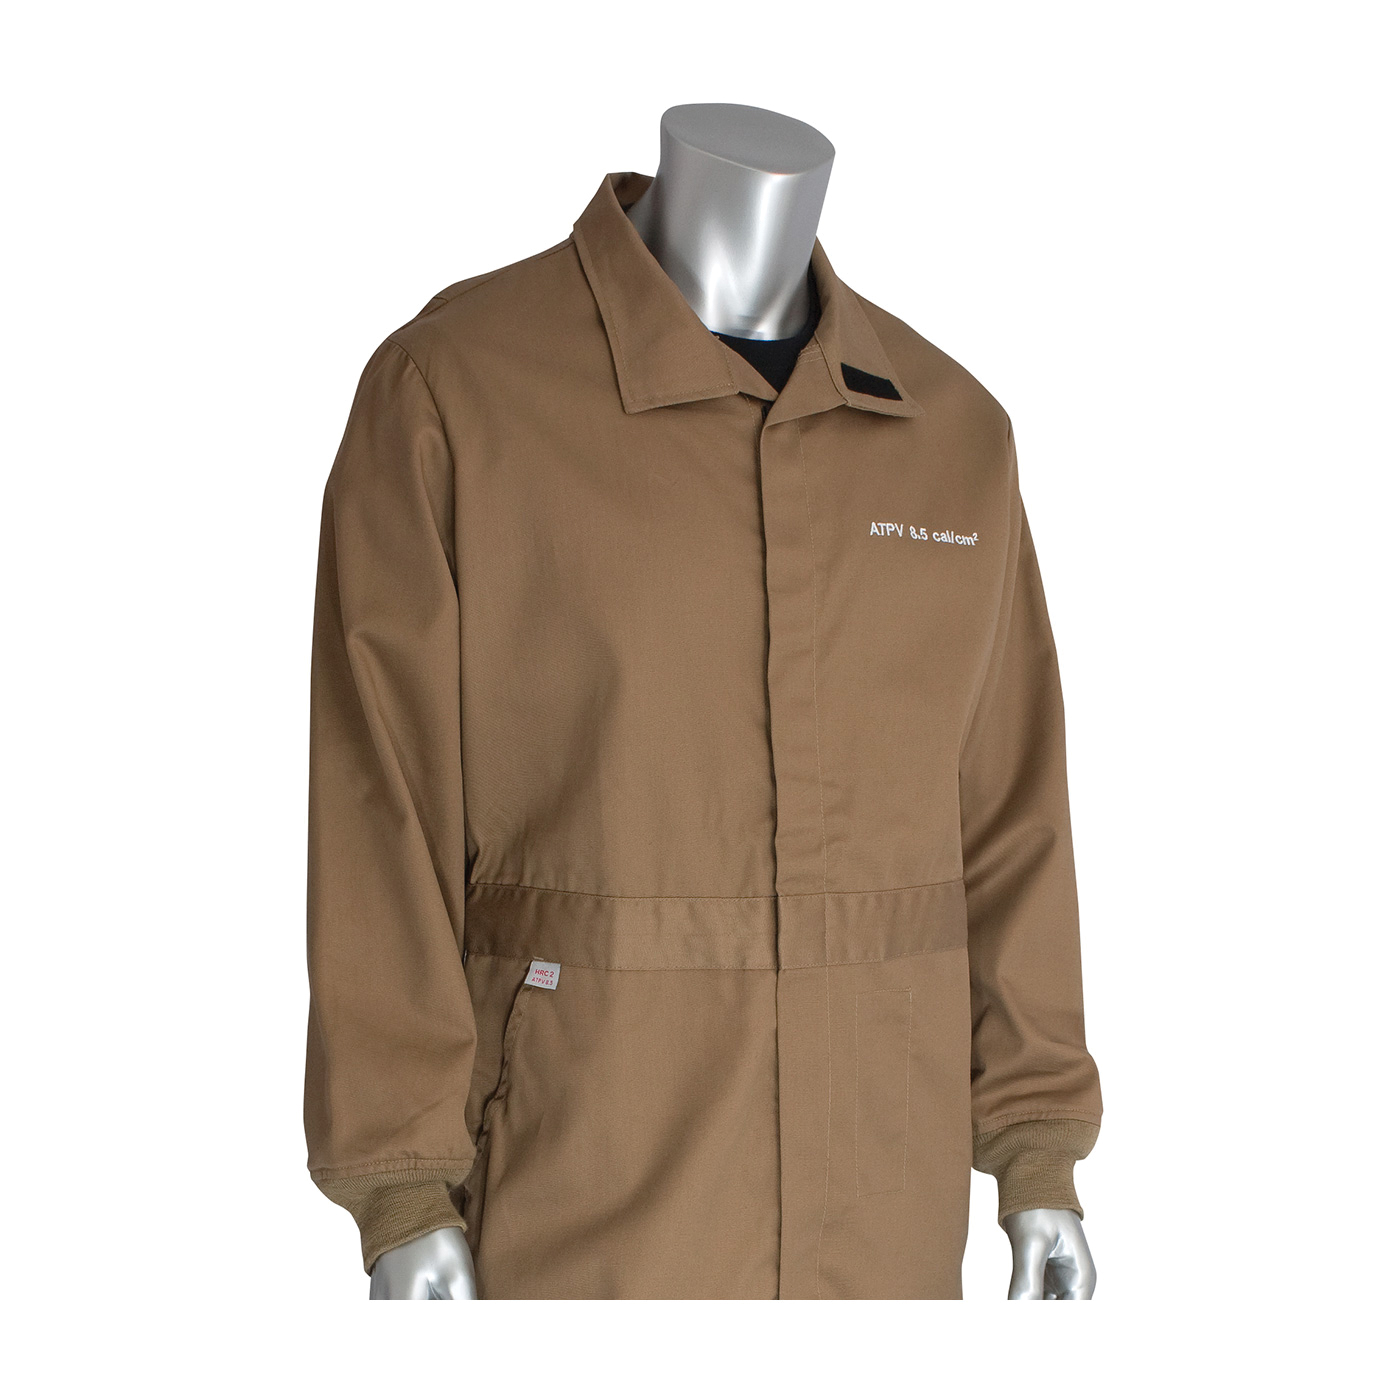 PIP® 9100-2110D/3X Flame Resistant Coverall With Insect Repellant, 3XL, Khaki, 90% Cotton/10% Nylon/FR and Bug Repellent Twill Weave, 56 to 58 in Chest, 32 in L Inseam